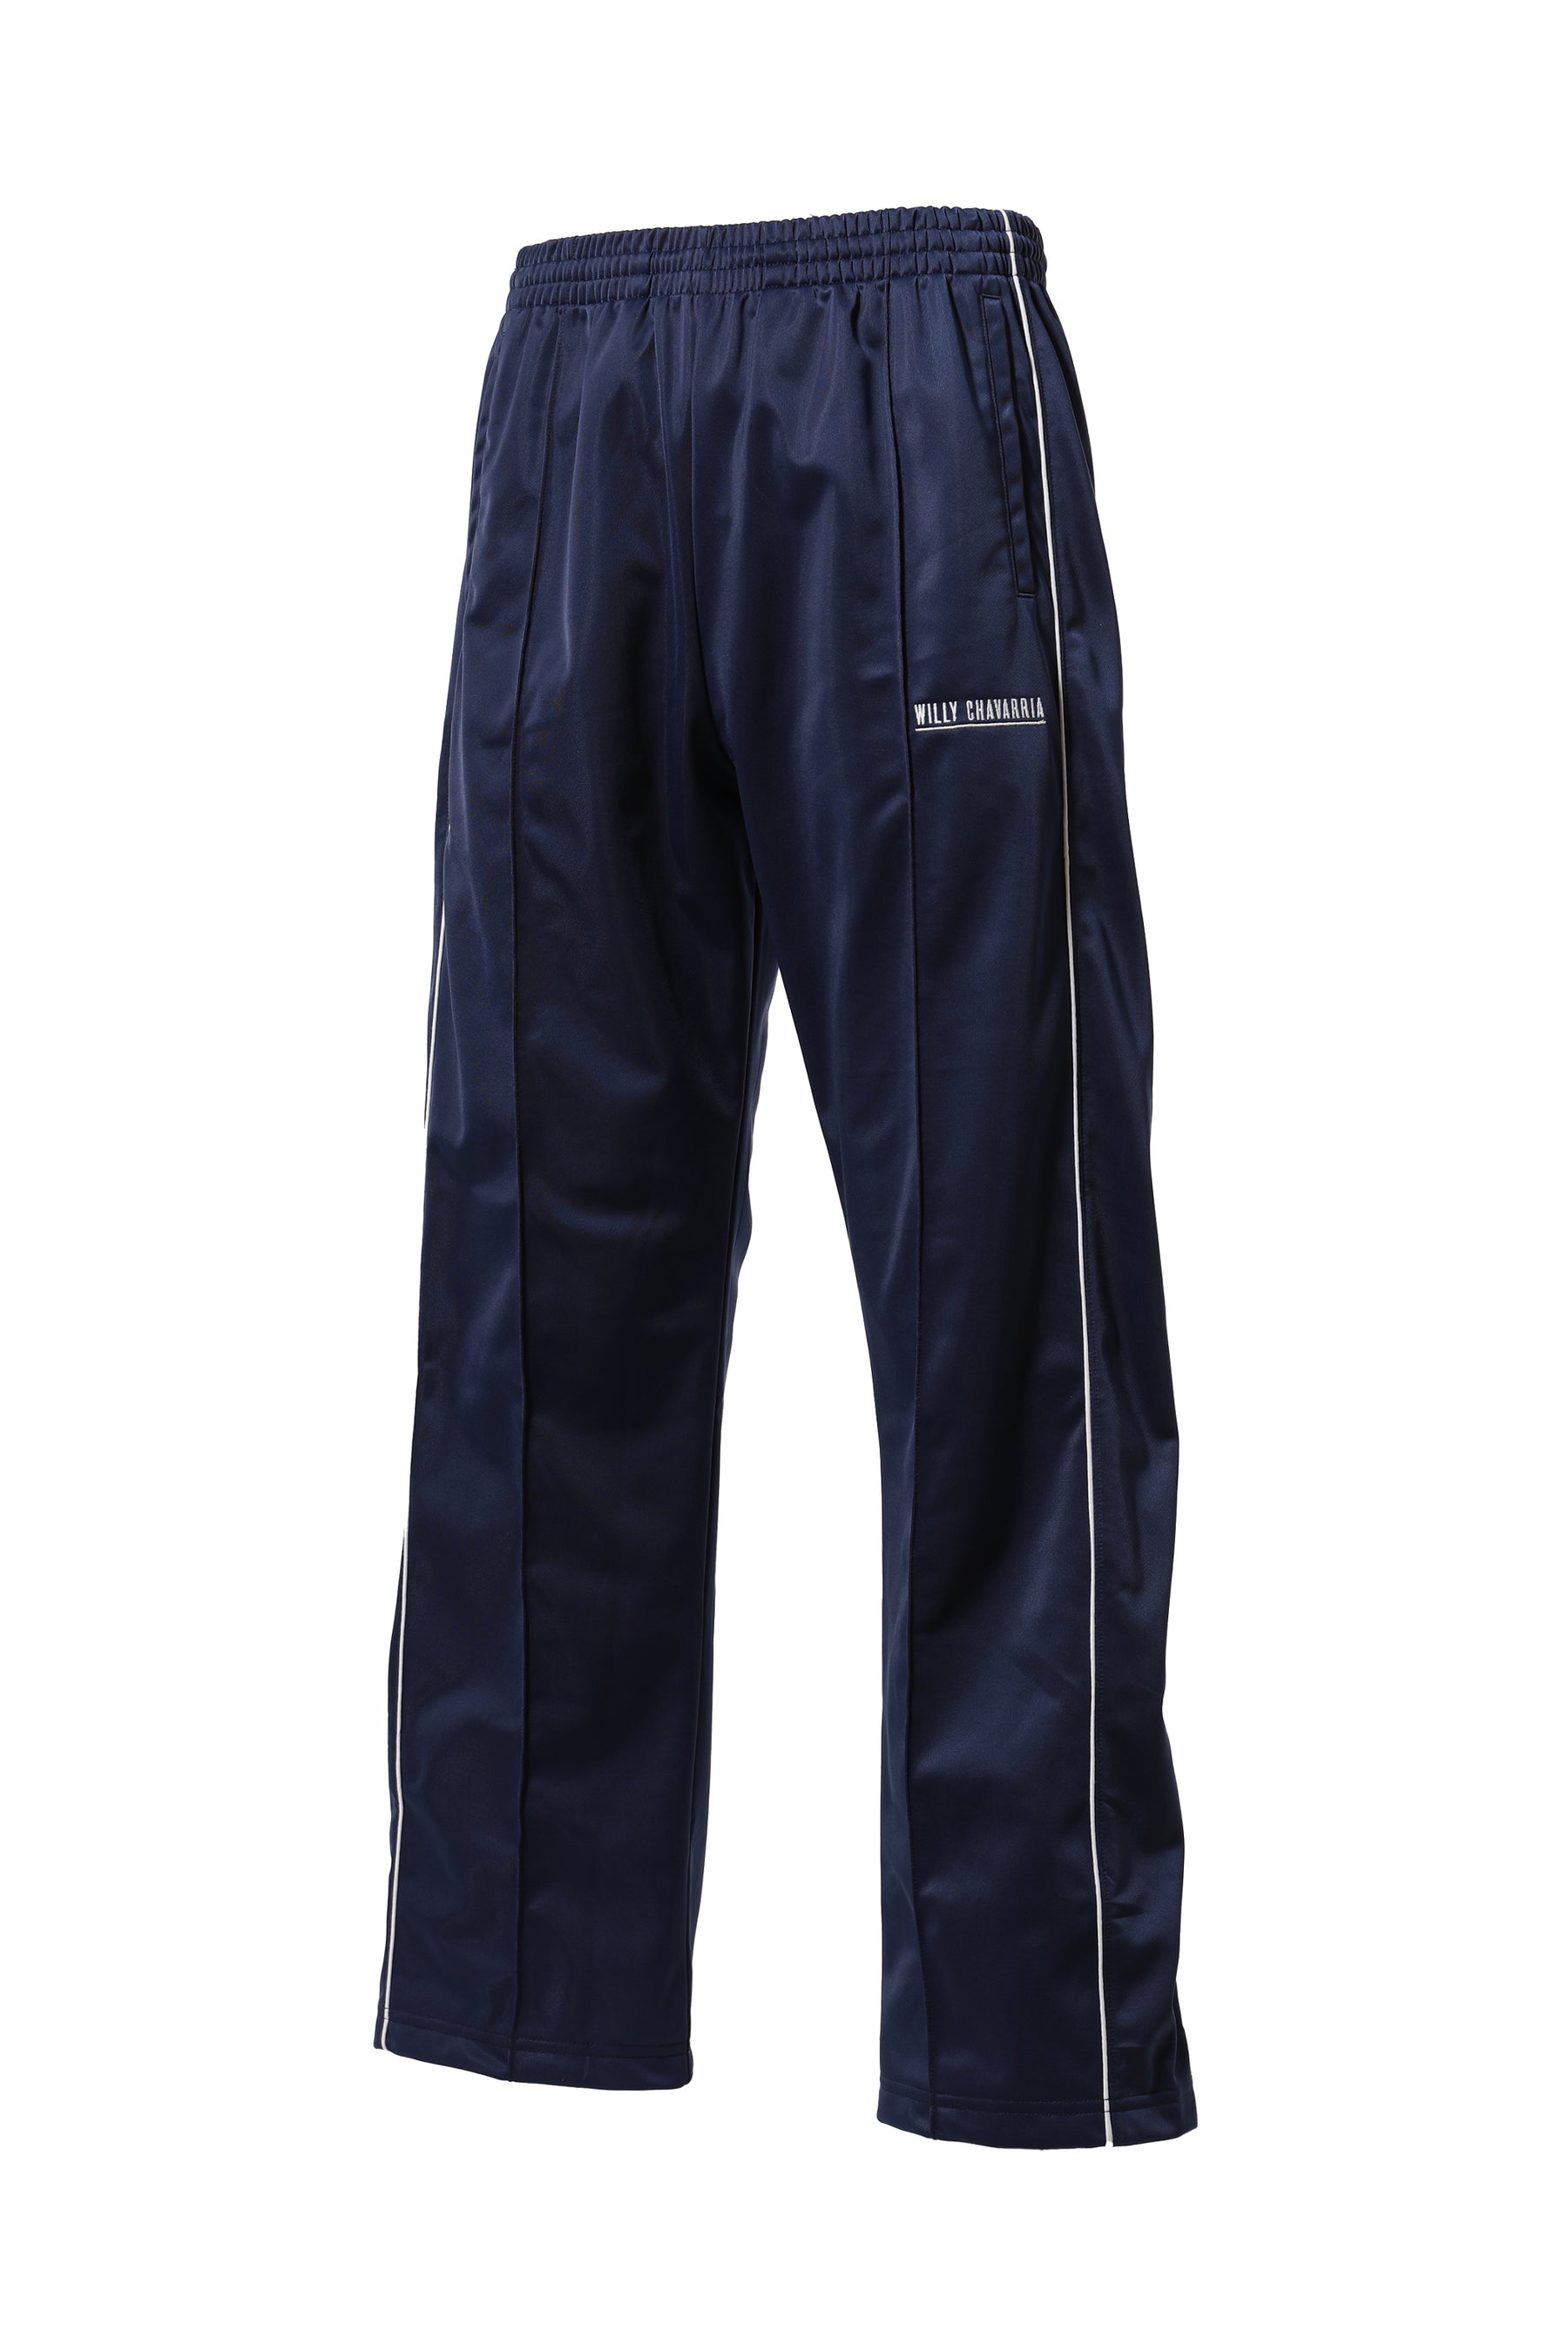 WILLY CHAVARRIA ウィリー チャバリア FW23 NEW TRACK PANTS / NVY -NUBIAN